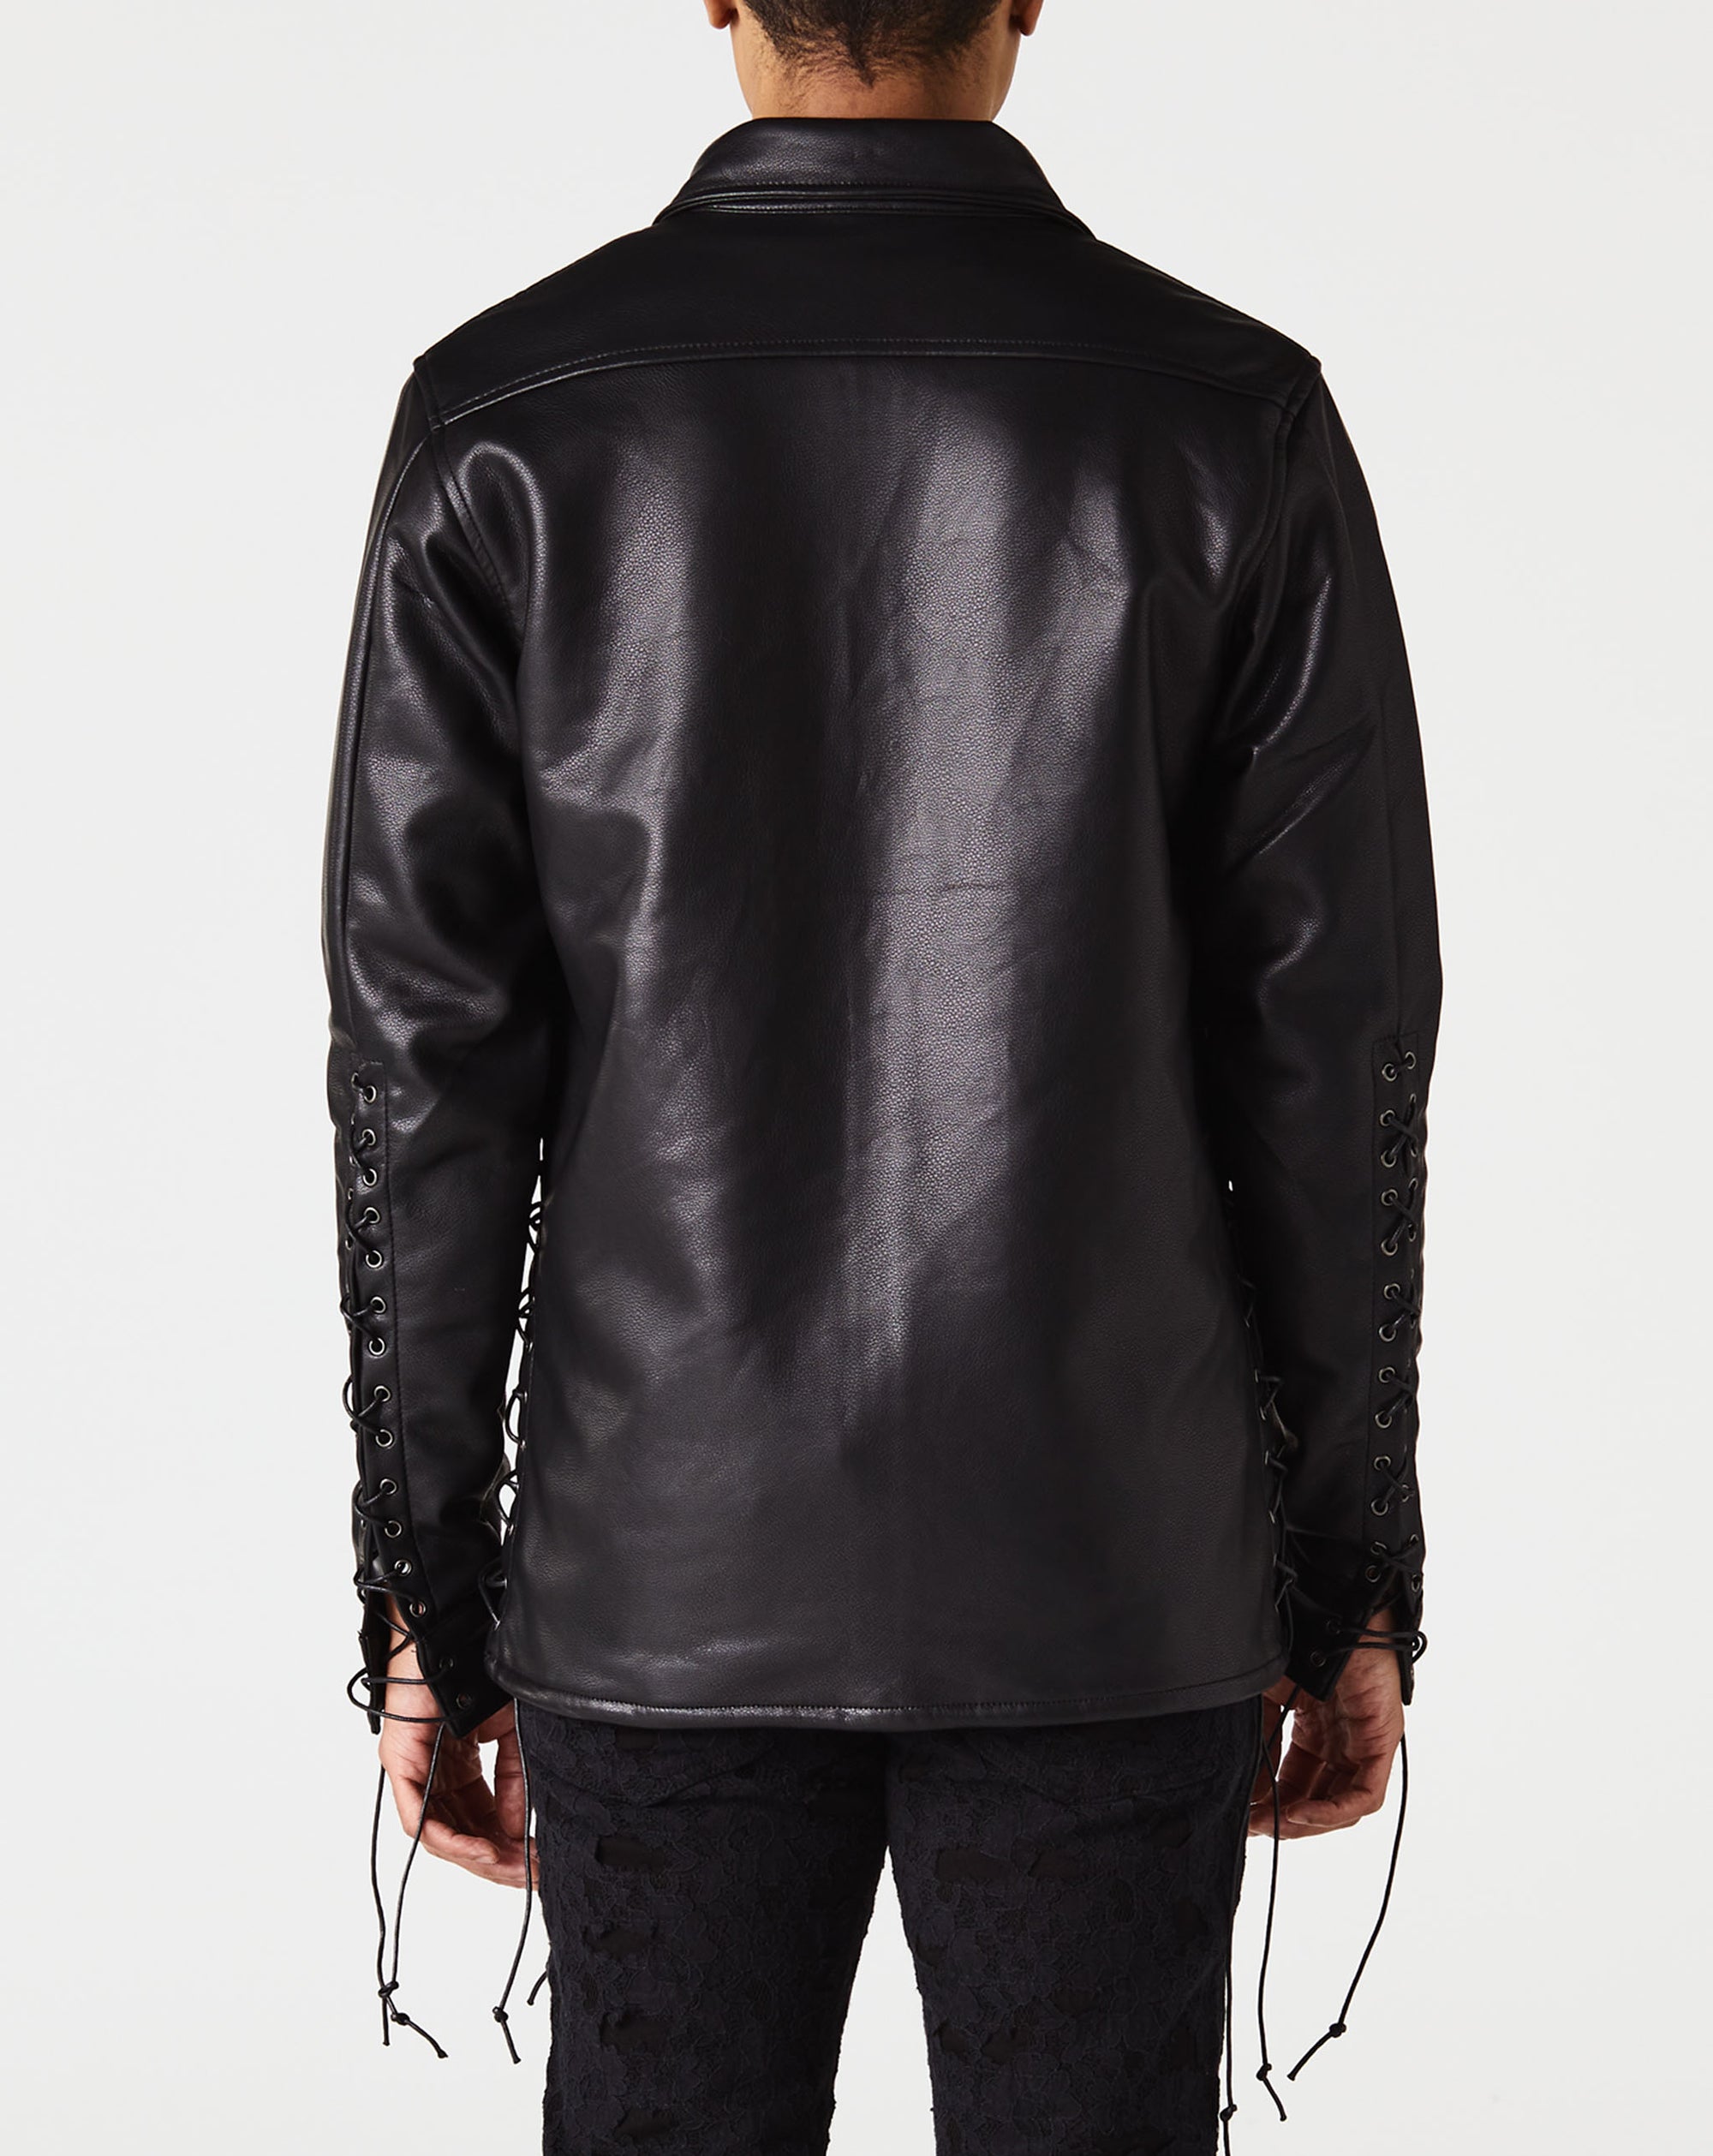 VALABASAS Neo Pu Leather Jacket - Rule of Next Apparel